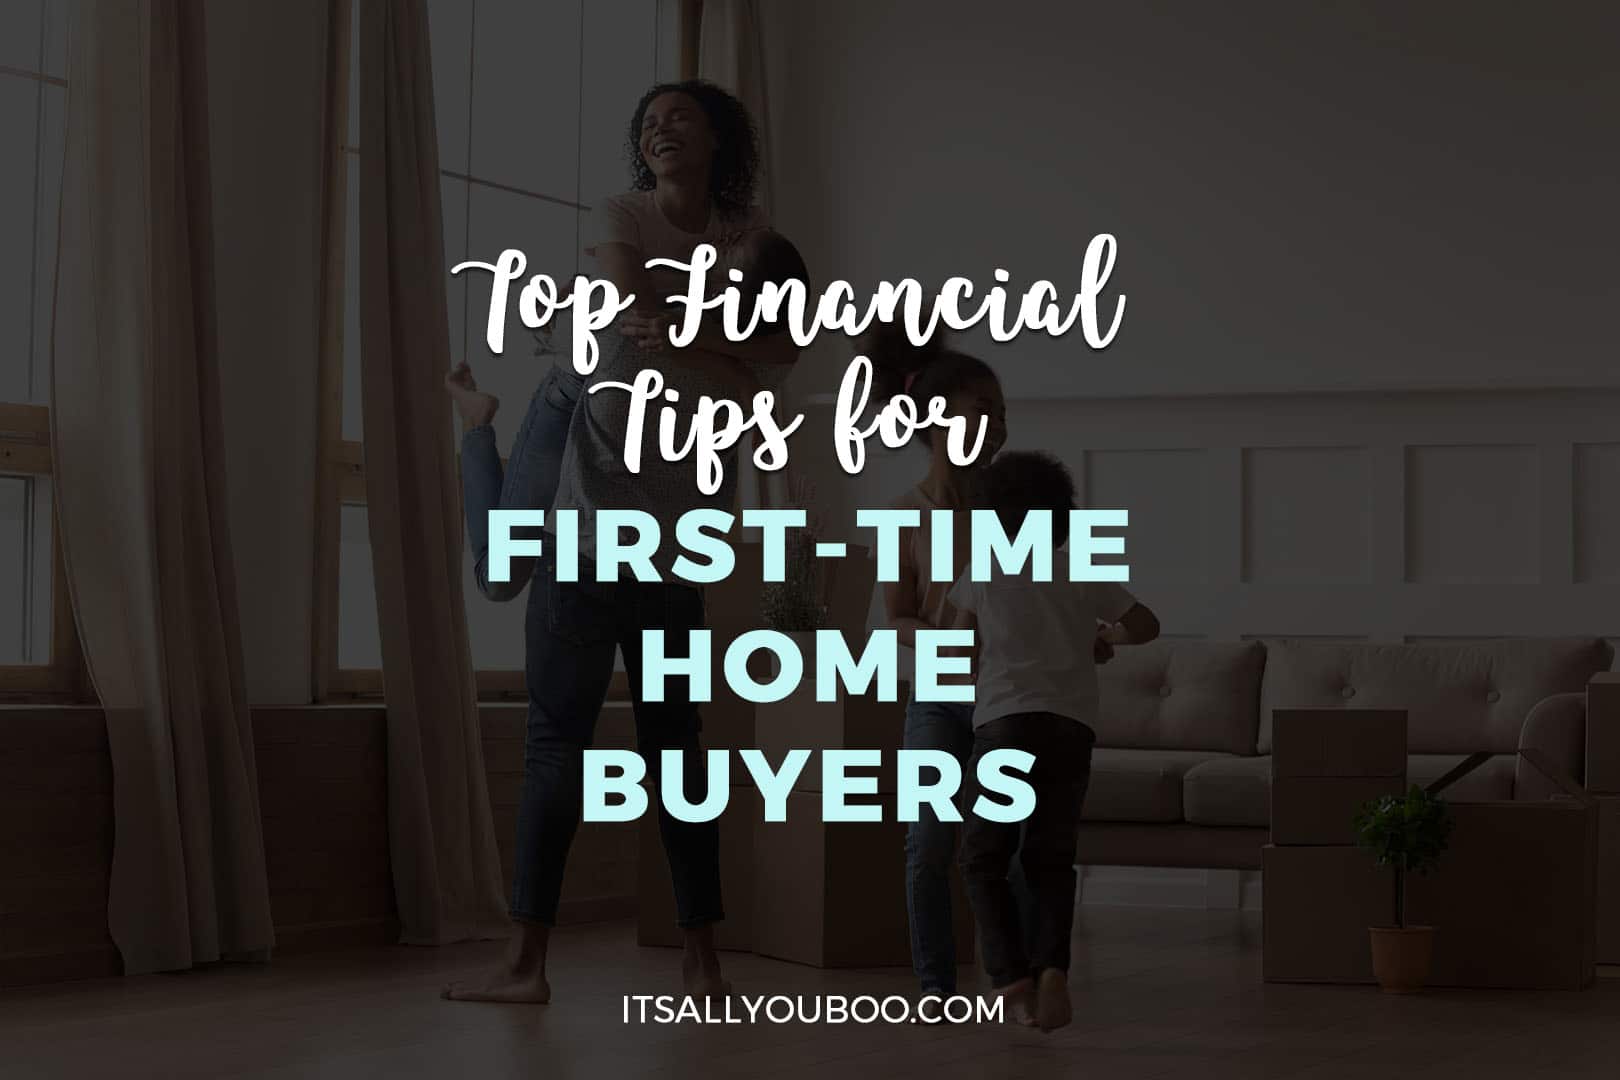 Top Financial Tips for First-Time Home Buyers